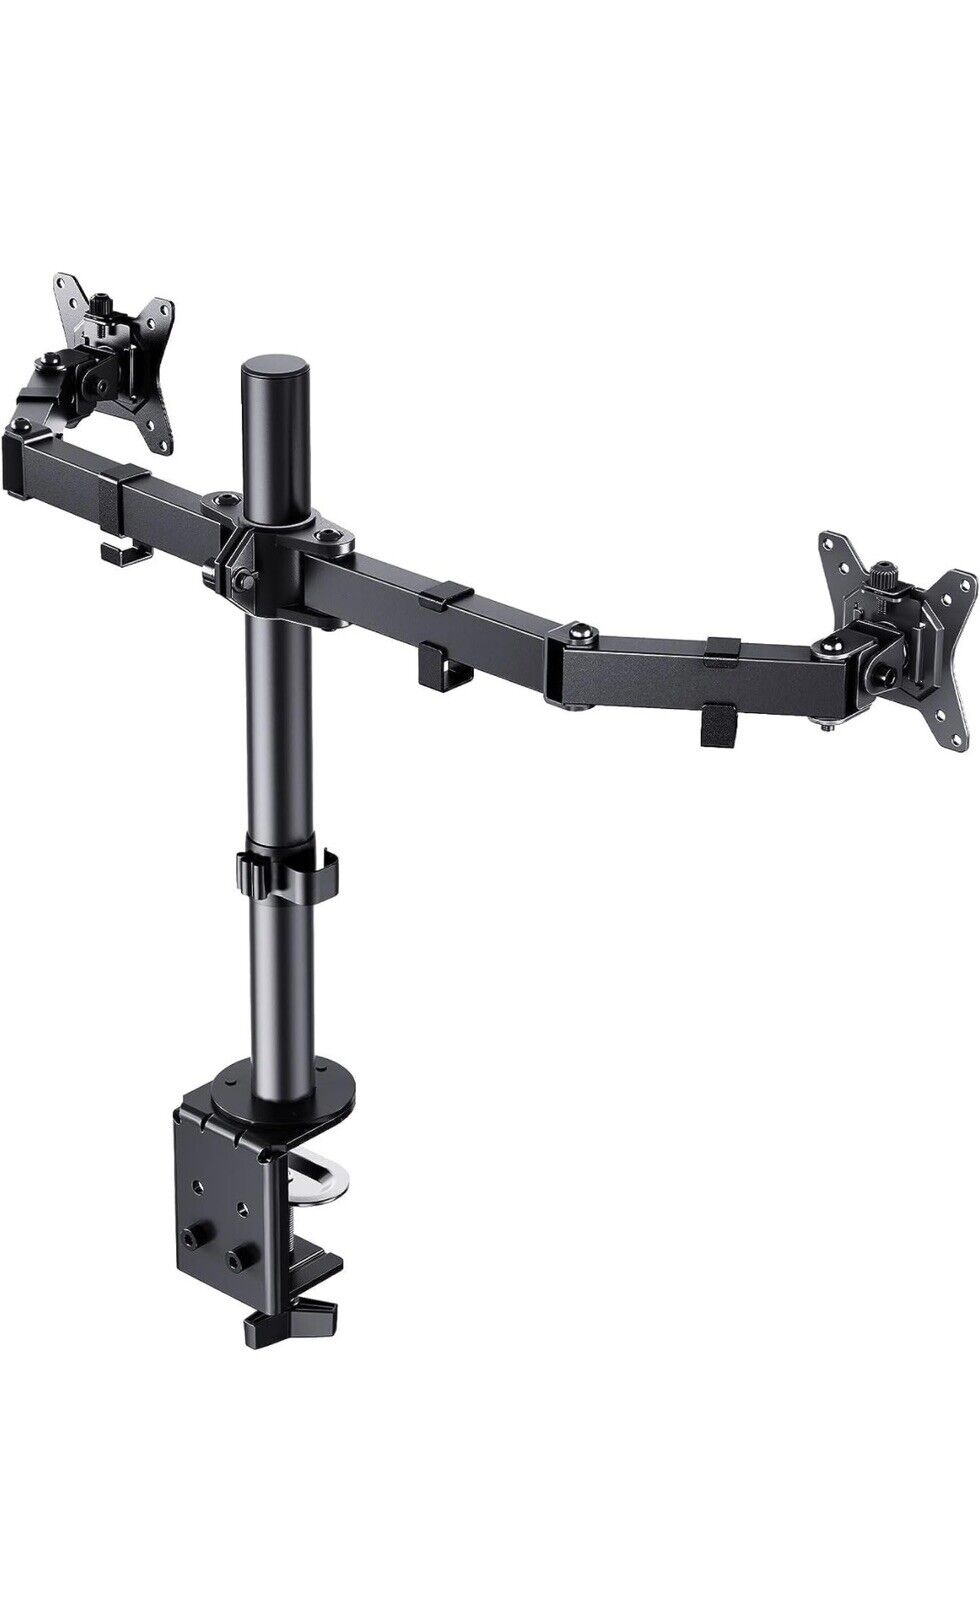 Monitor Dual Mount Ergear Desk Arm Adjustable Fully Computer Stand up to 32 inch